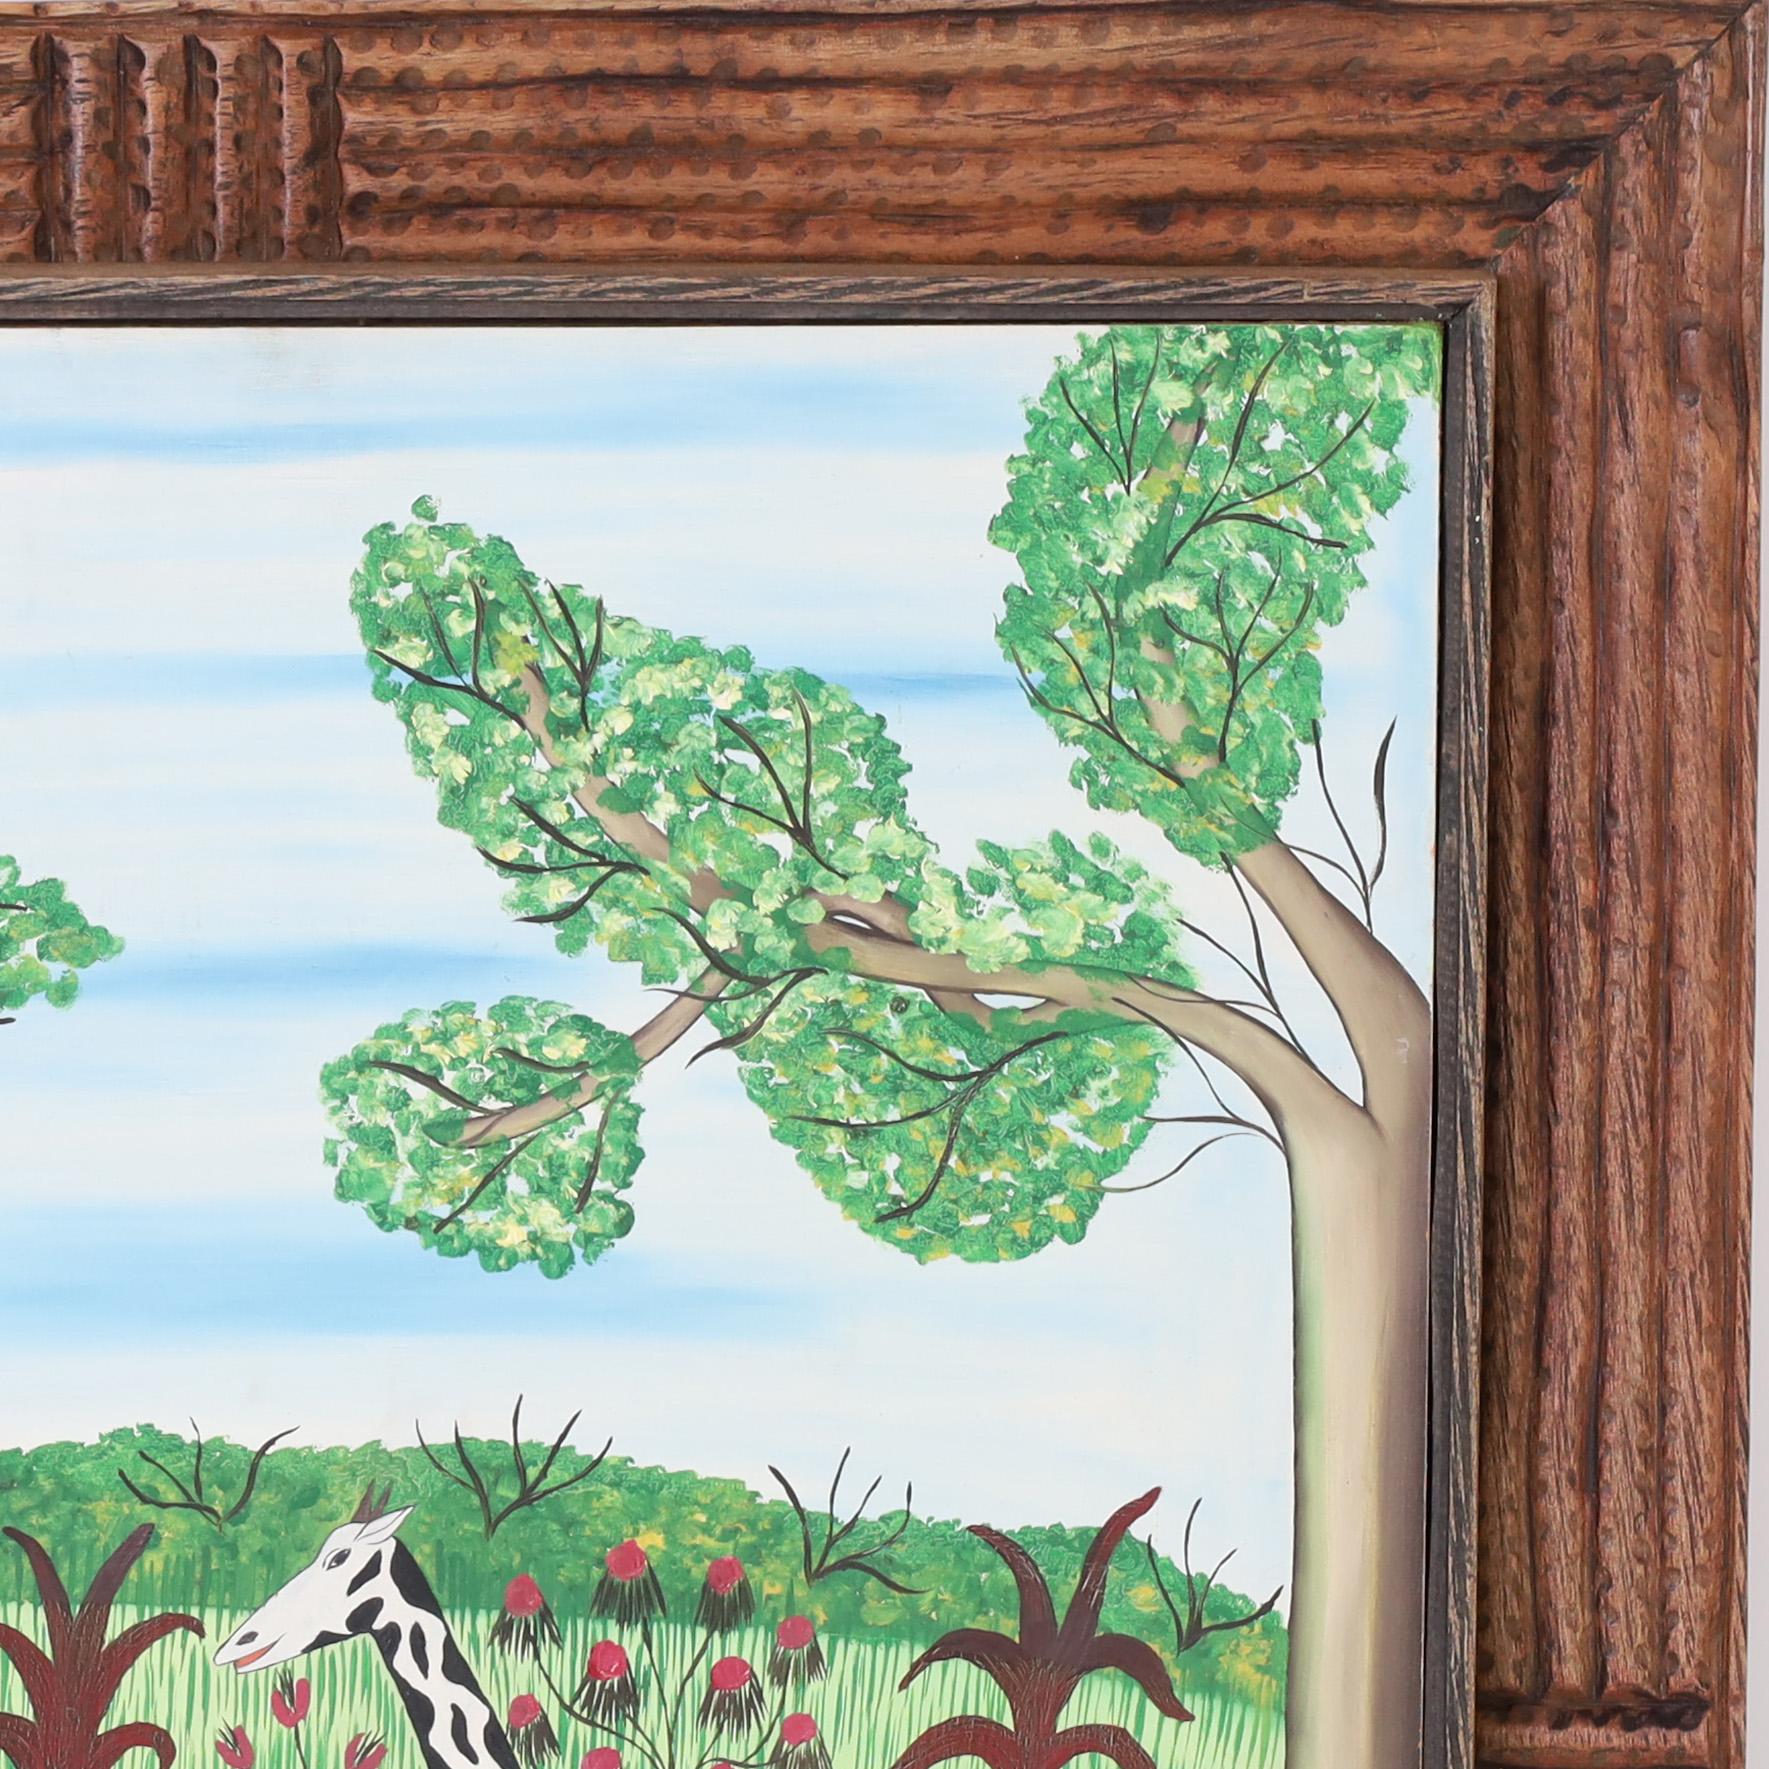 Striking vintage acrylic painting on board of two giraffes in a landscape with flowers and trees executed in a distinctive playful naive technique. Signed Fils Rigaud Benoit 74 and presented in the original carved wood frame.